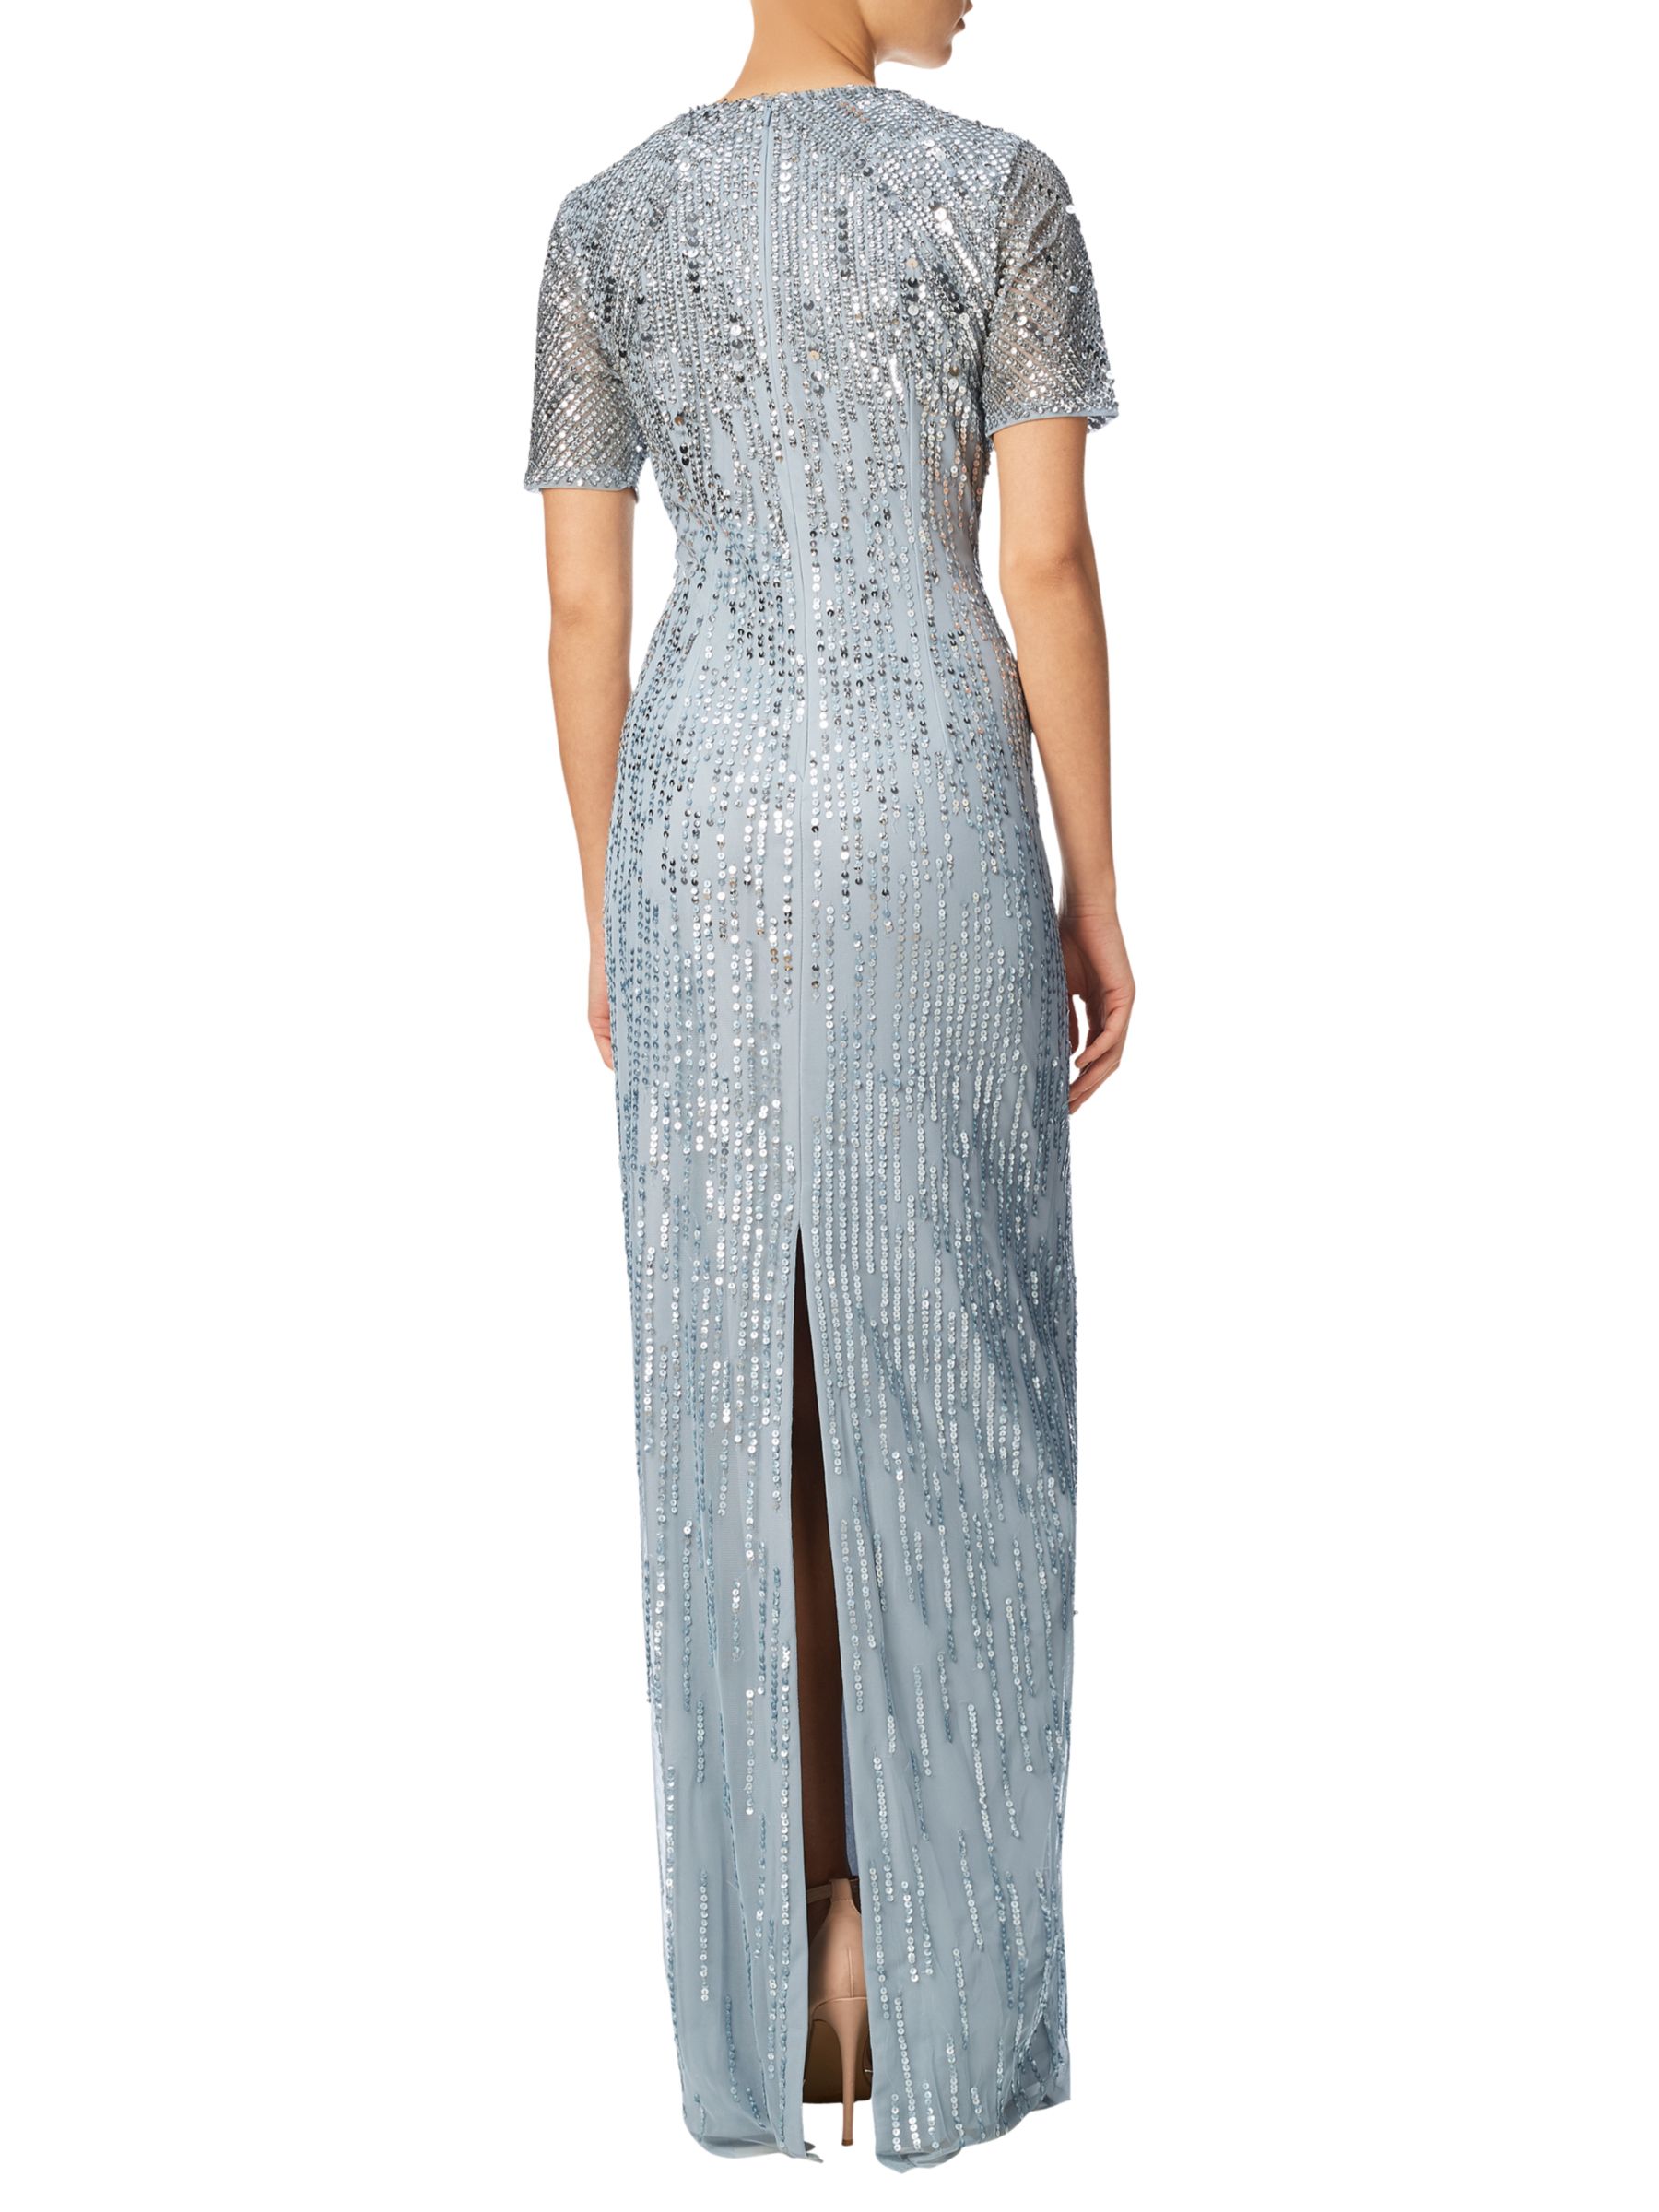 Adrianna Papell Ombre Sequin Gown, Blue Heather